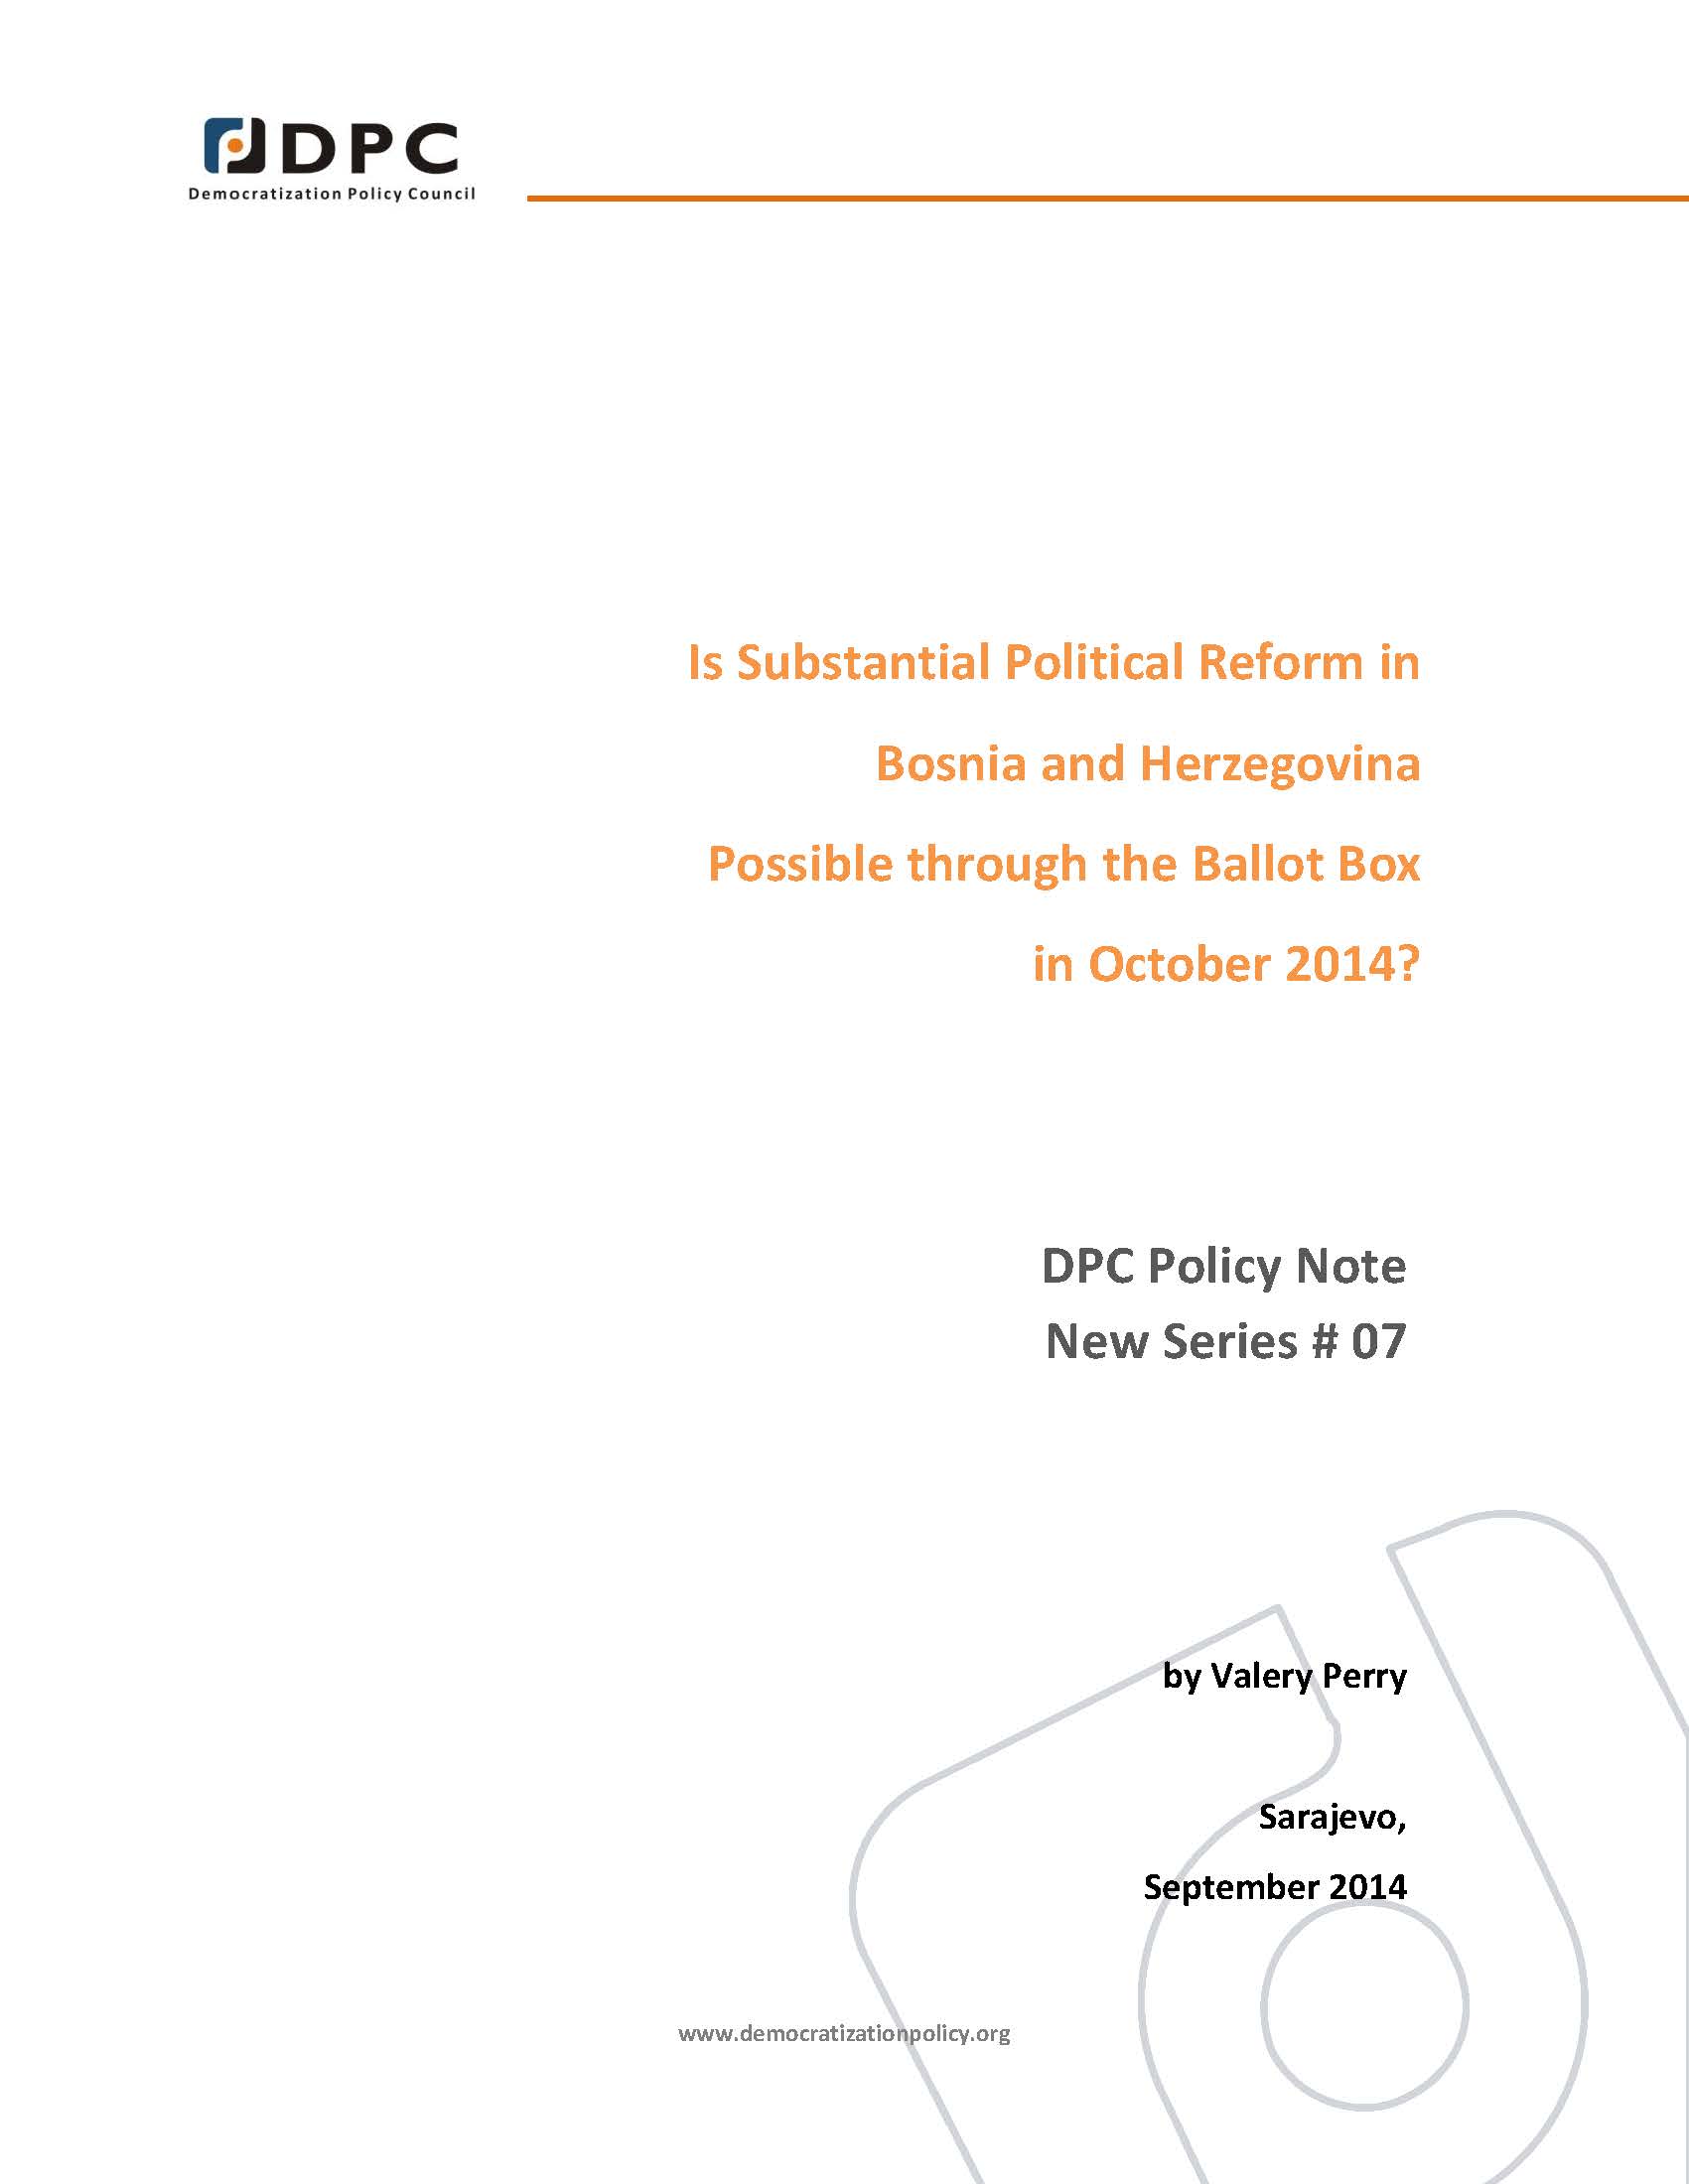 DPC POLICY NOTE 07: Is Substantial Political Reform in Bosnia and Herzegovina Possible through the Ballot Box in October 2014?